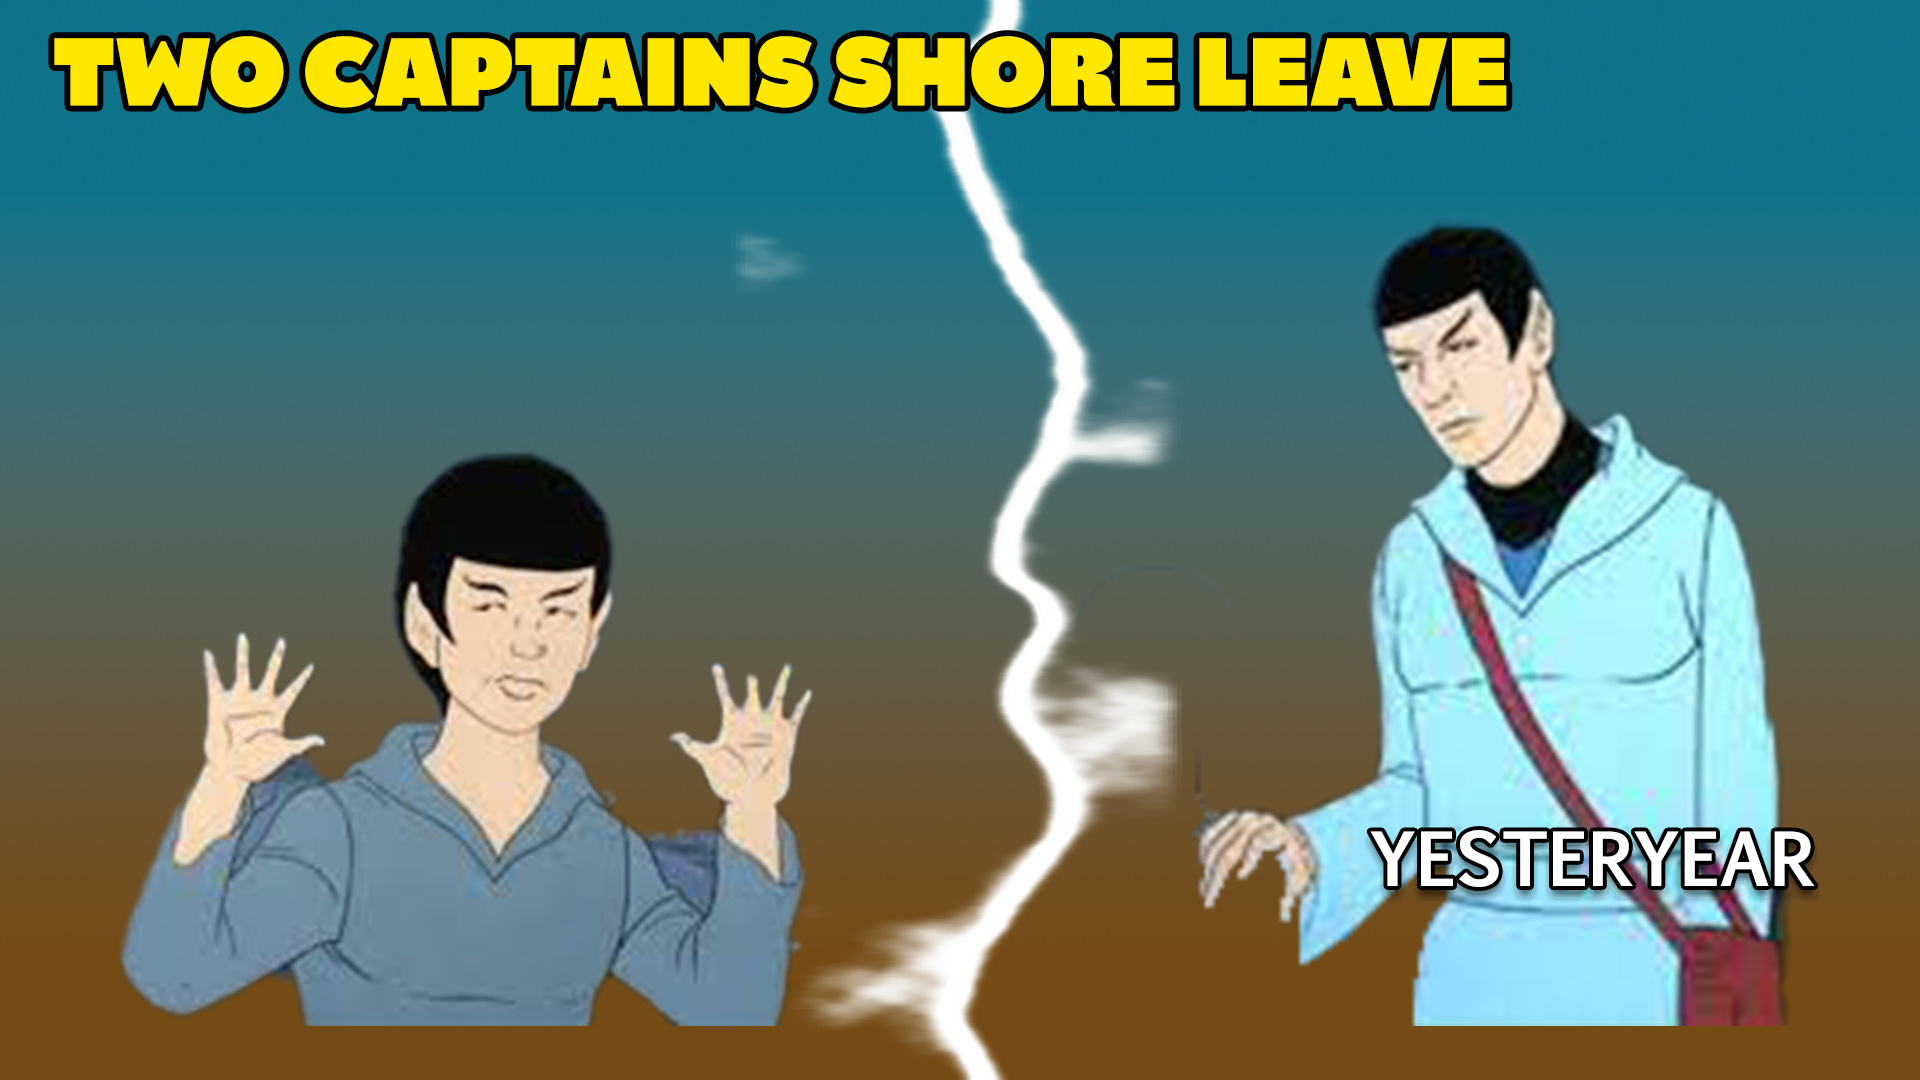 Two Captains Shore Leave: Star Trek: The Animated Series – “Yesteryear” Review